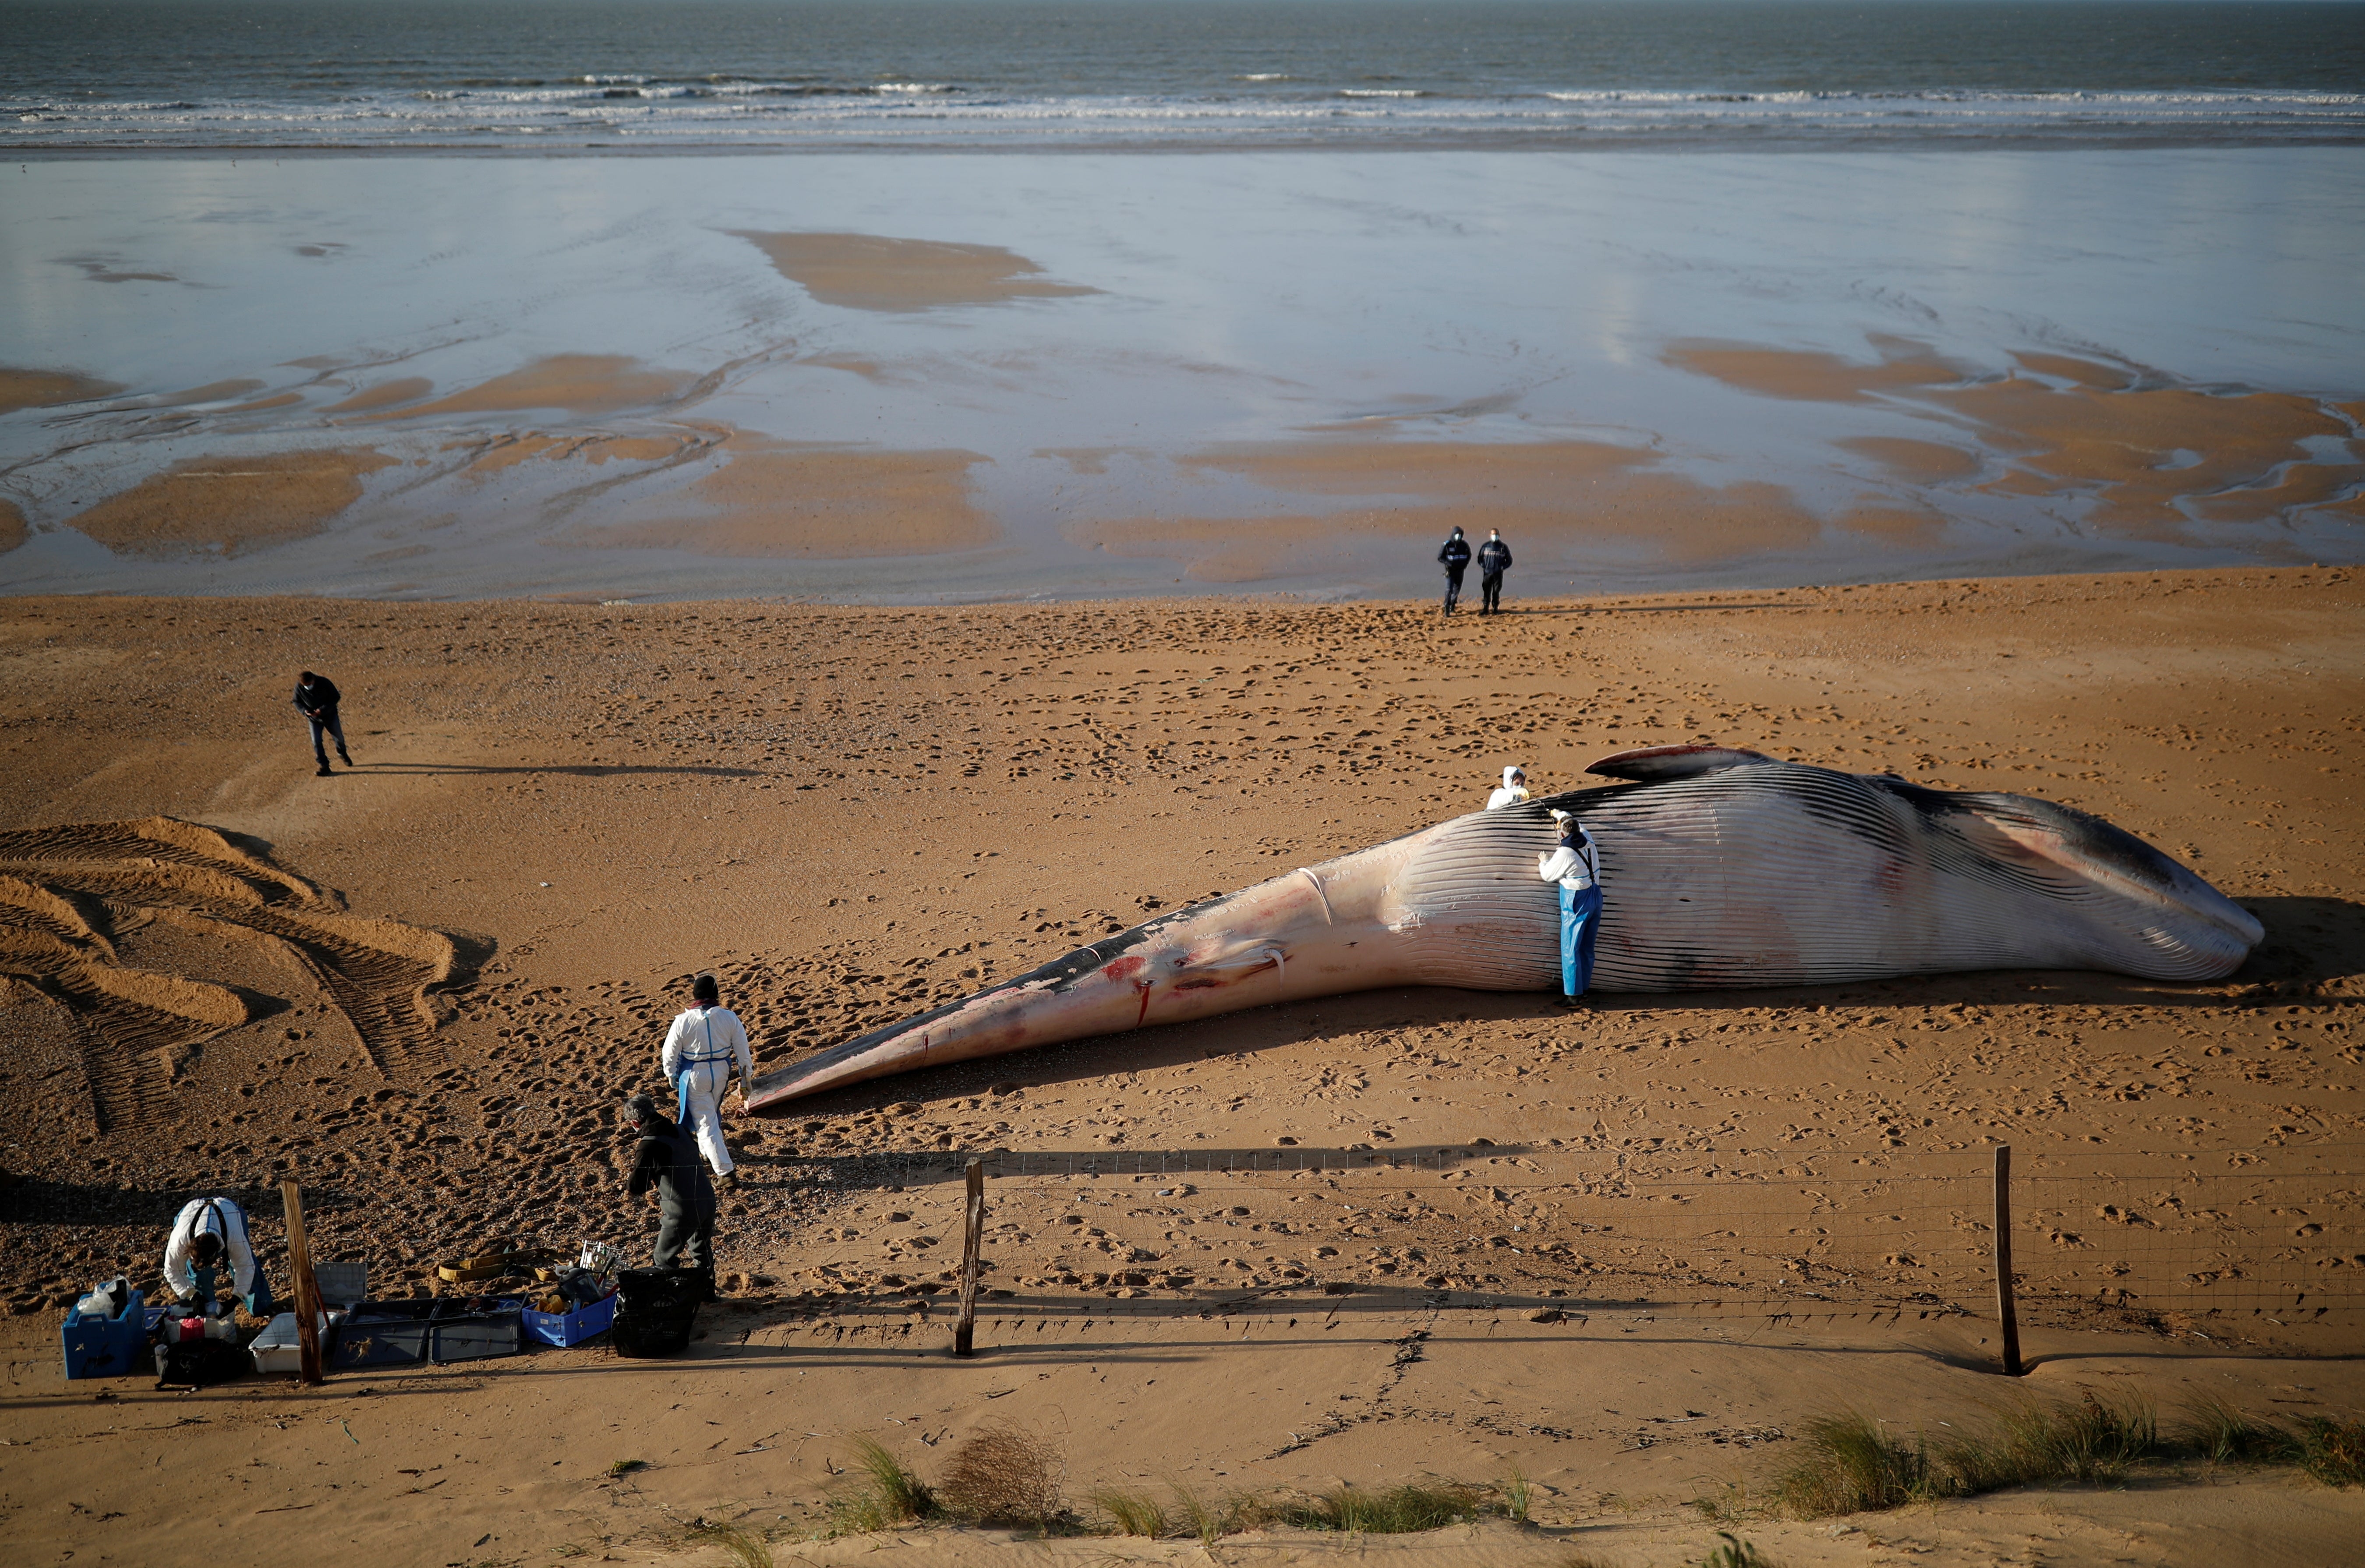 All of the whales have been malnourished and shown evidence of haemorrhaging